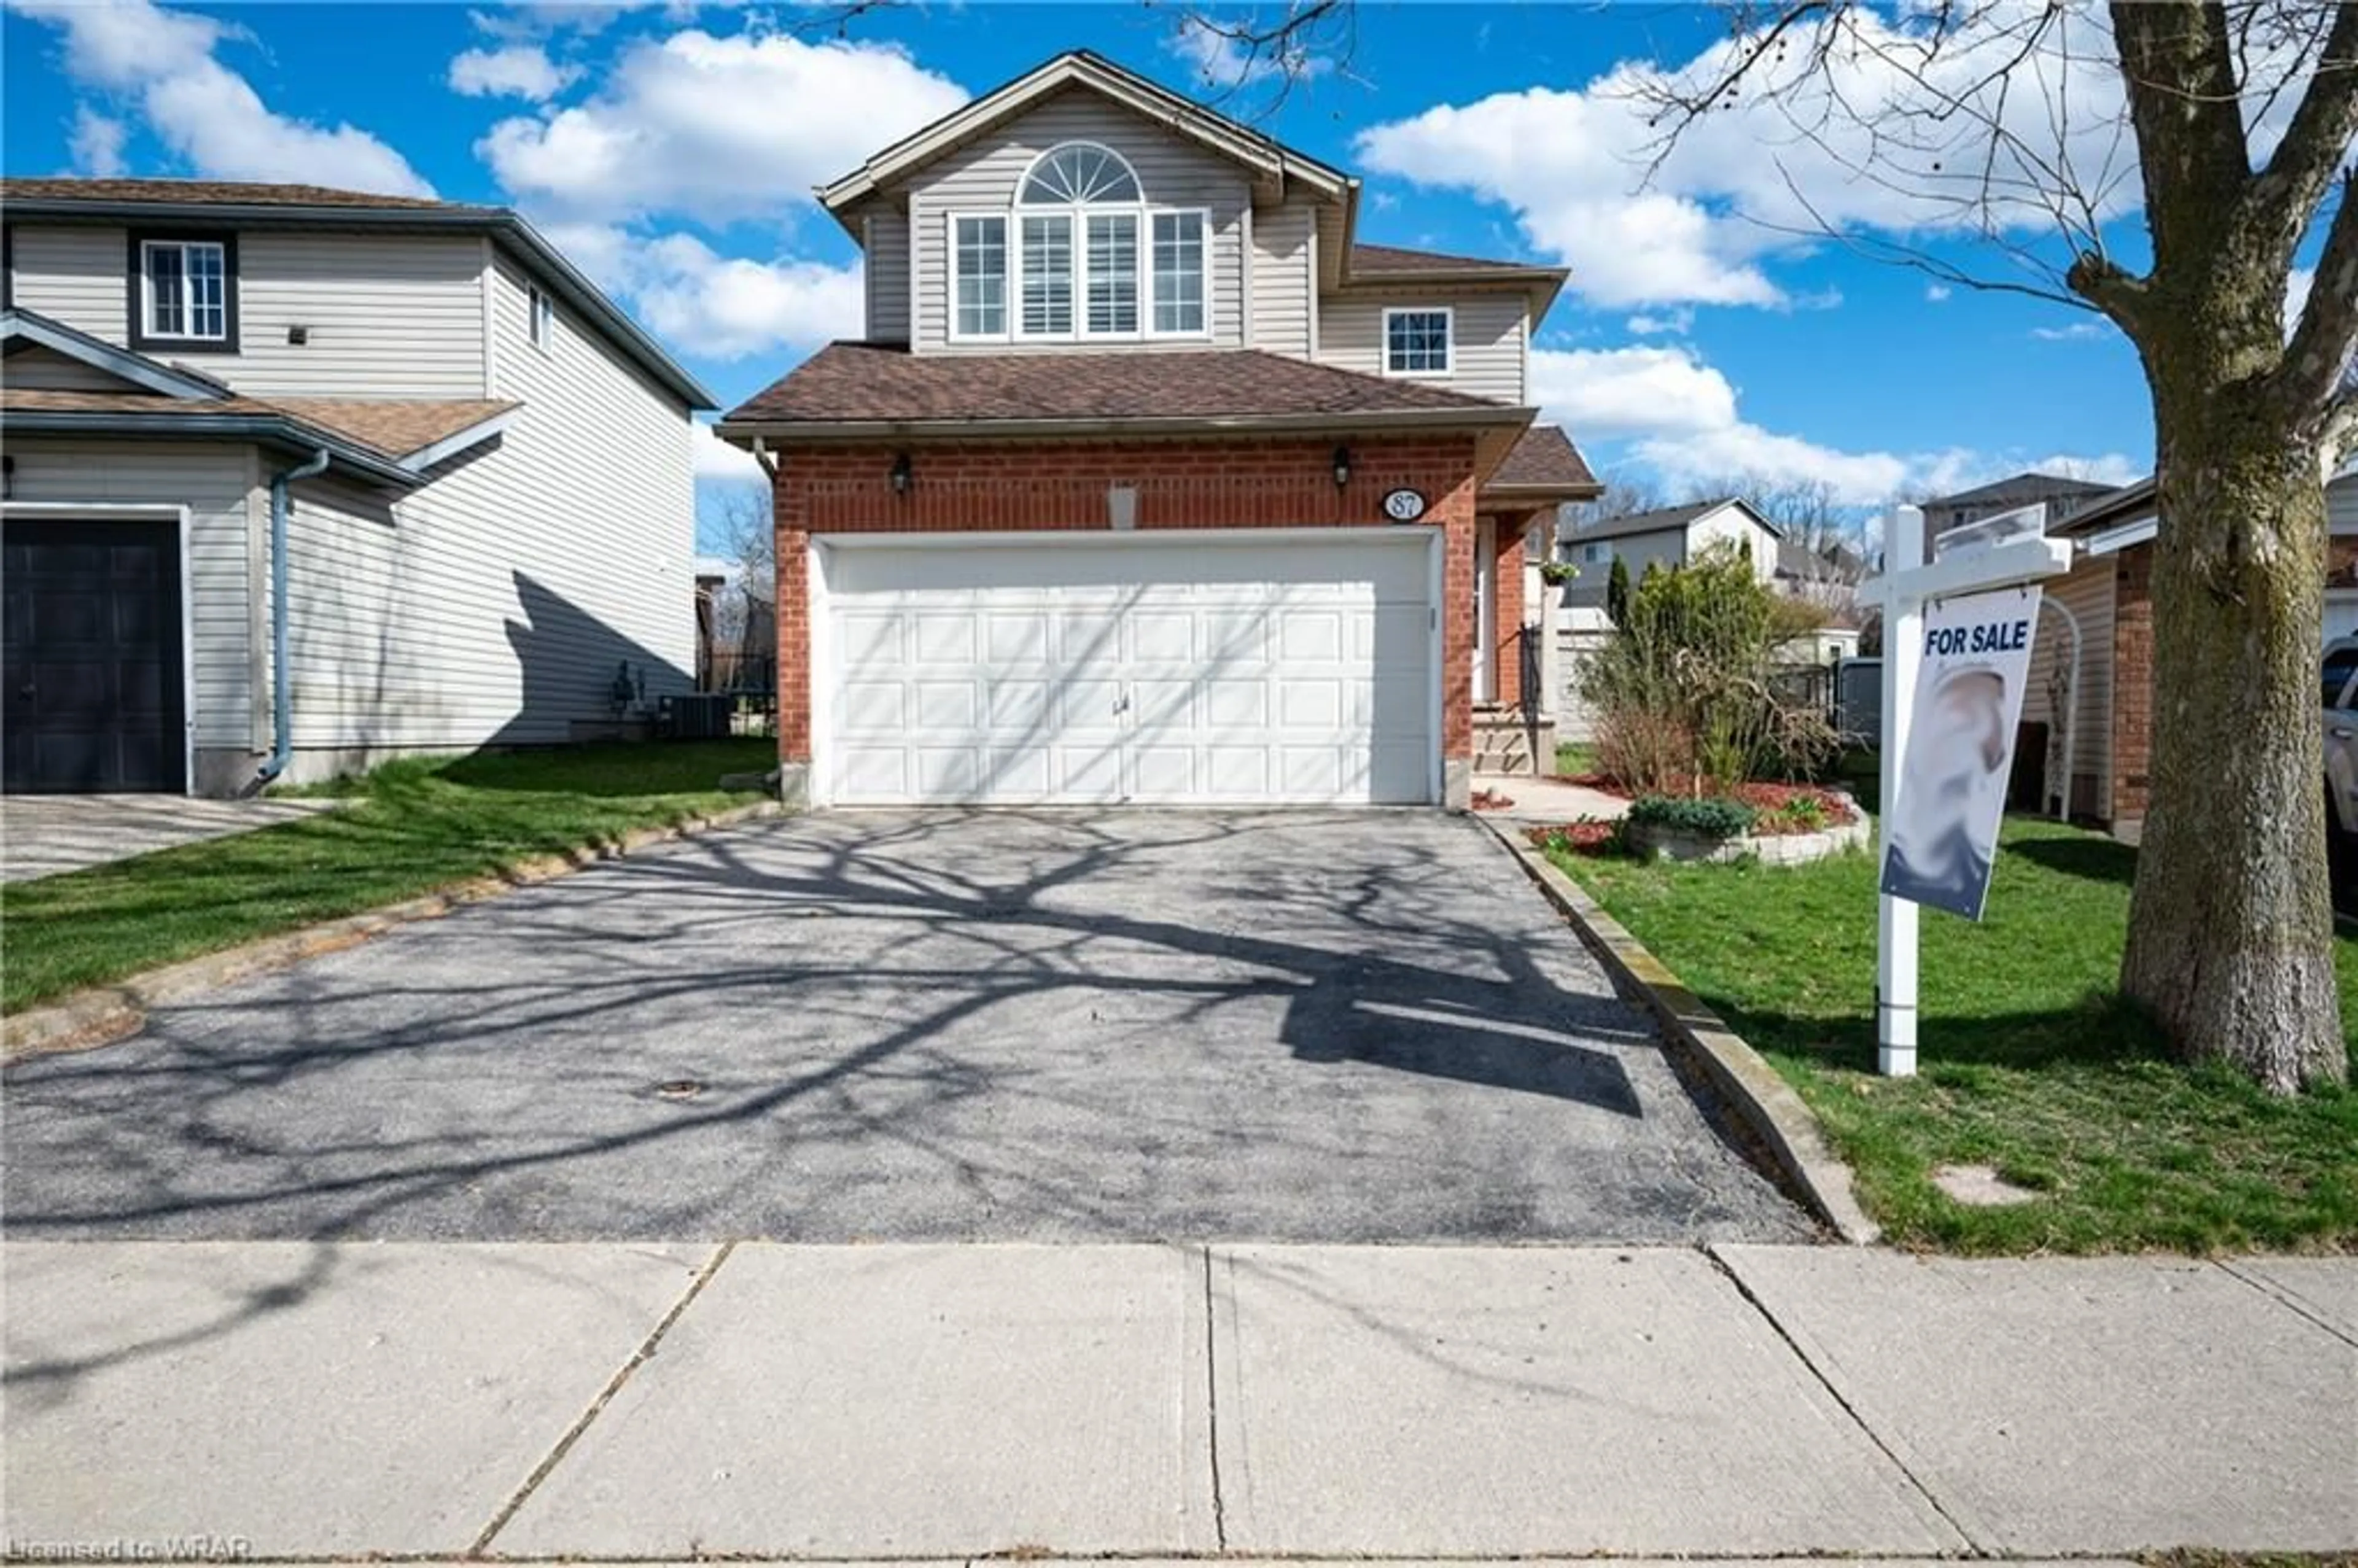 Frontside or backside of a home for 87 Melran Dr, Cambridge Ontario N3C 4C3